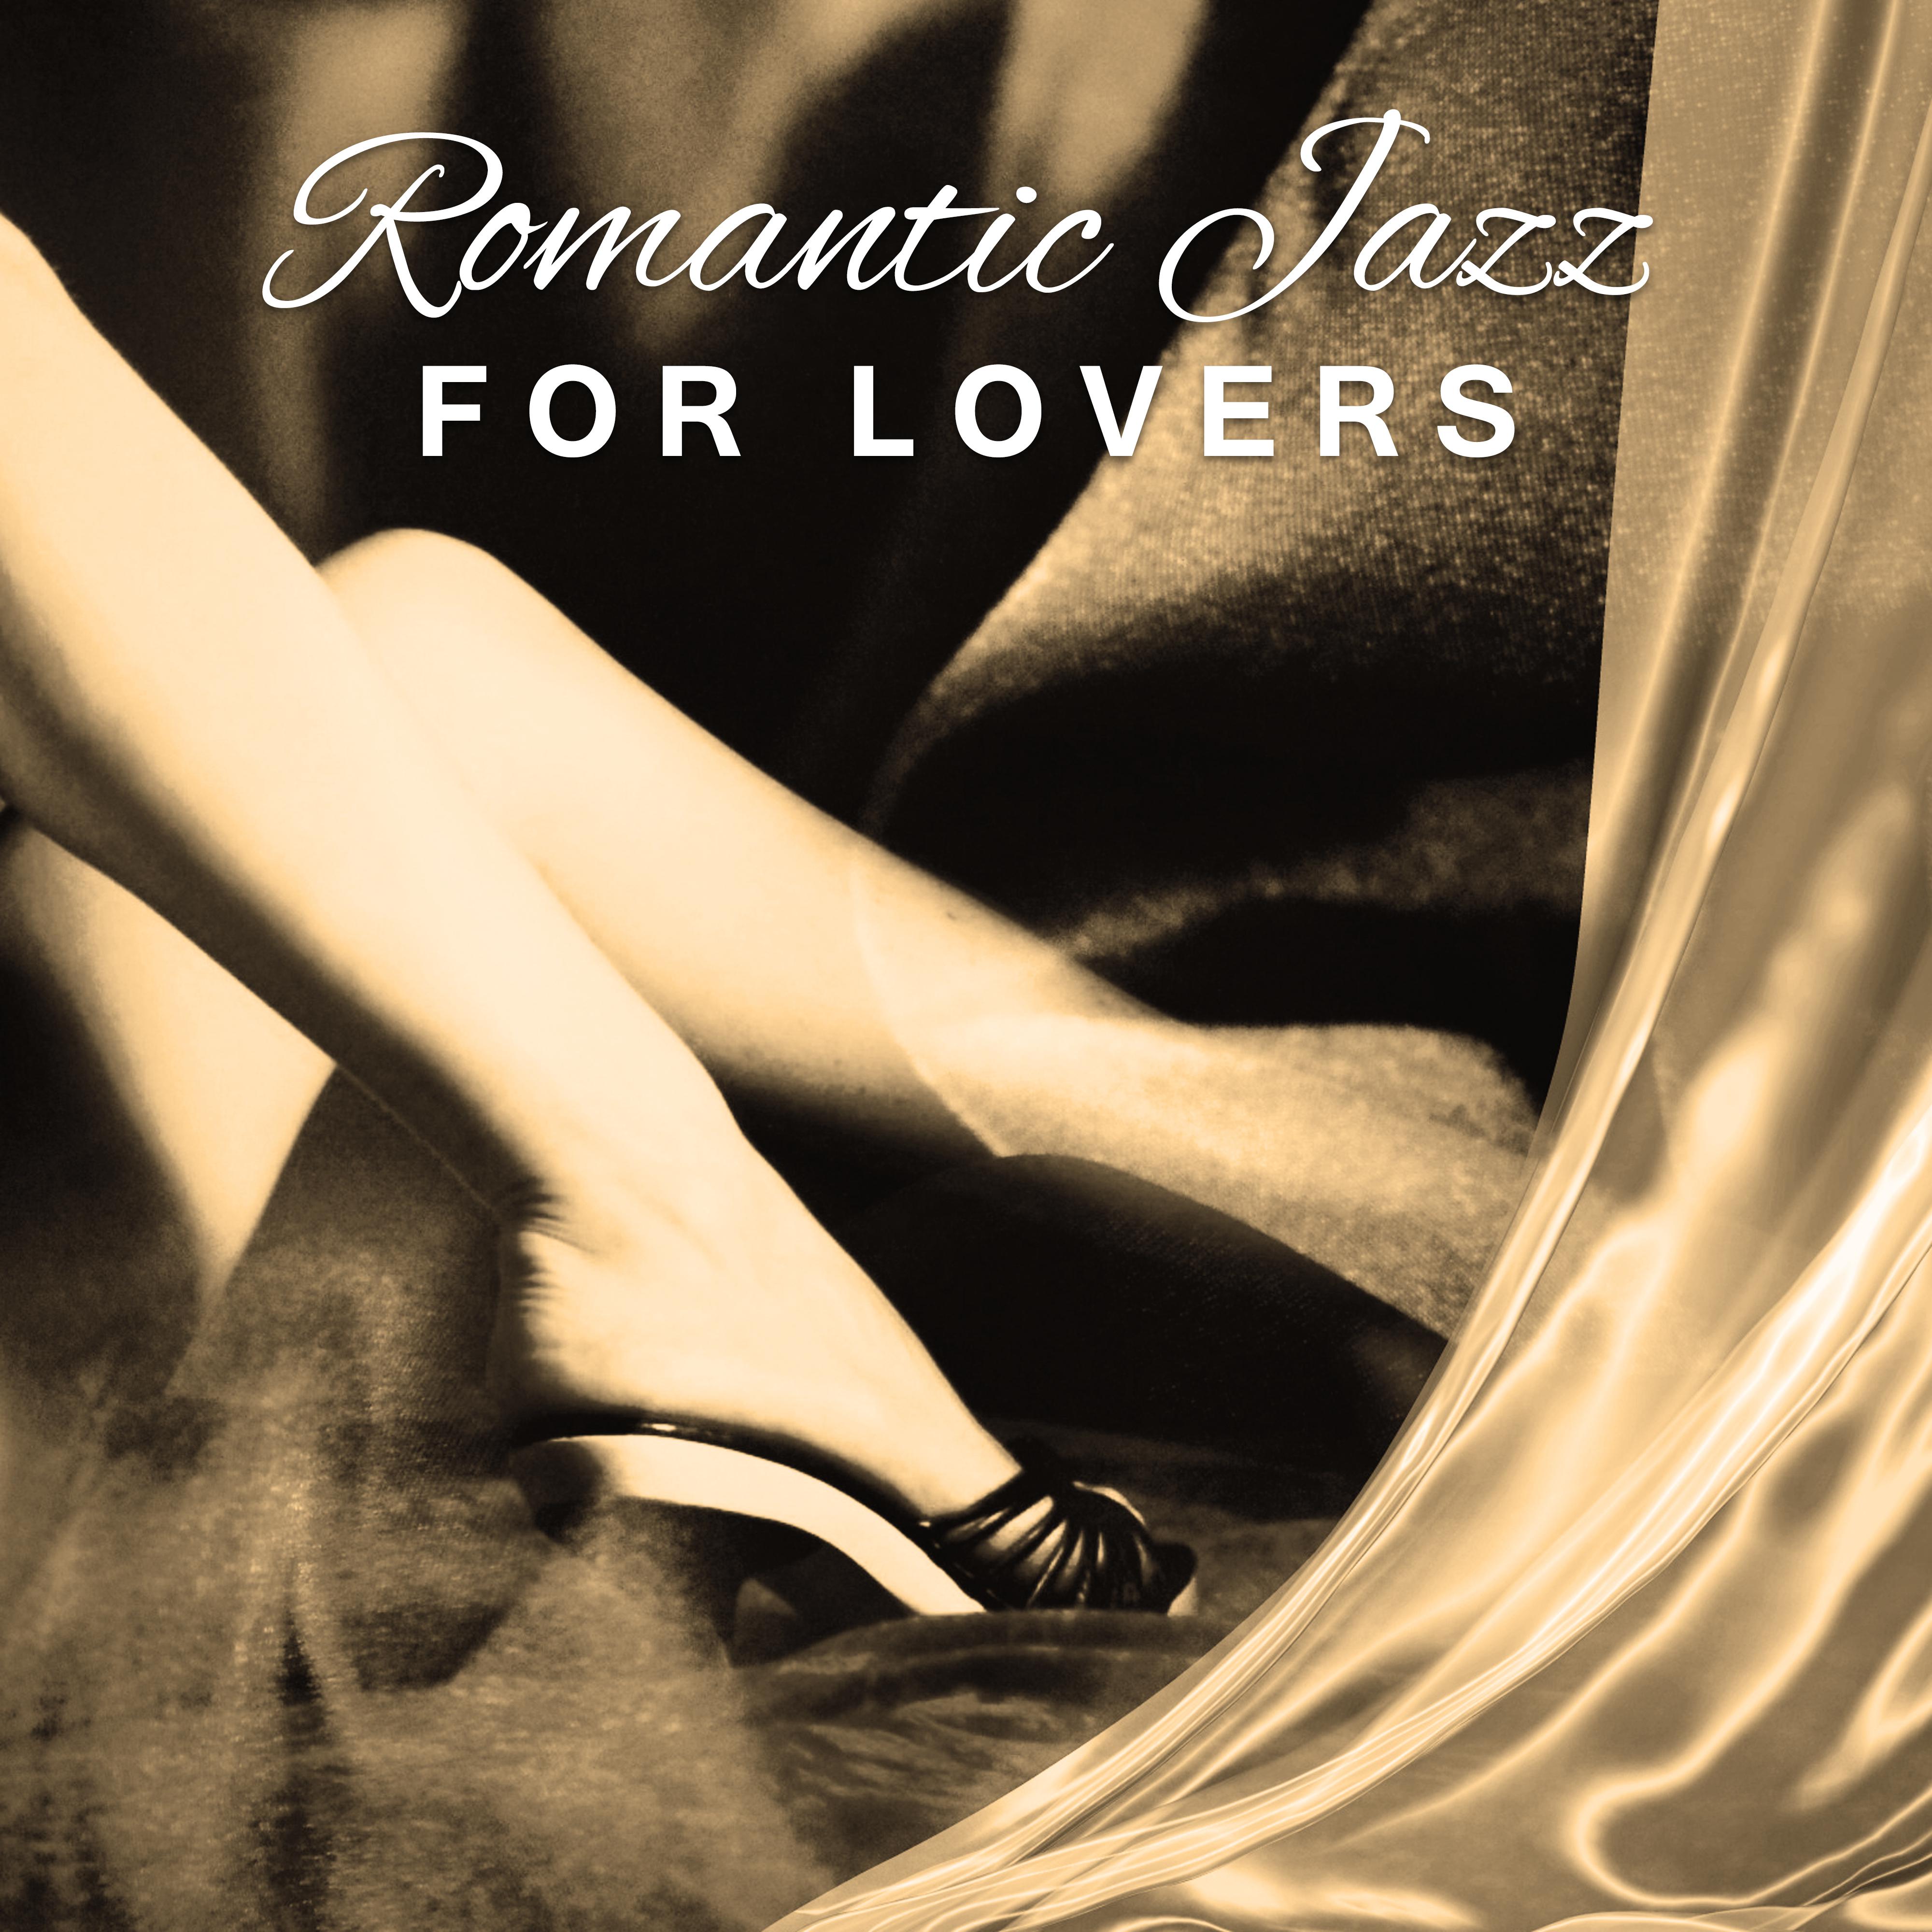 Romantic Jazz for Lovers  Love  Passion, Shades of Jazz, Romantic Vibes, Erotic Moves